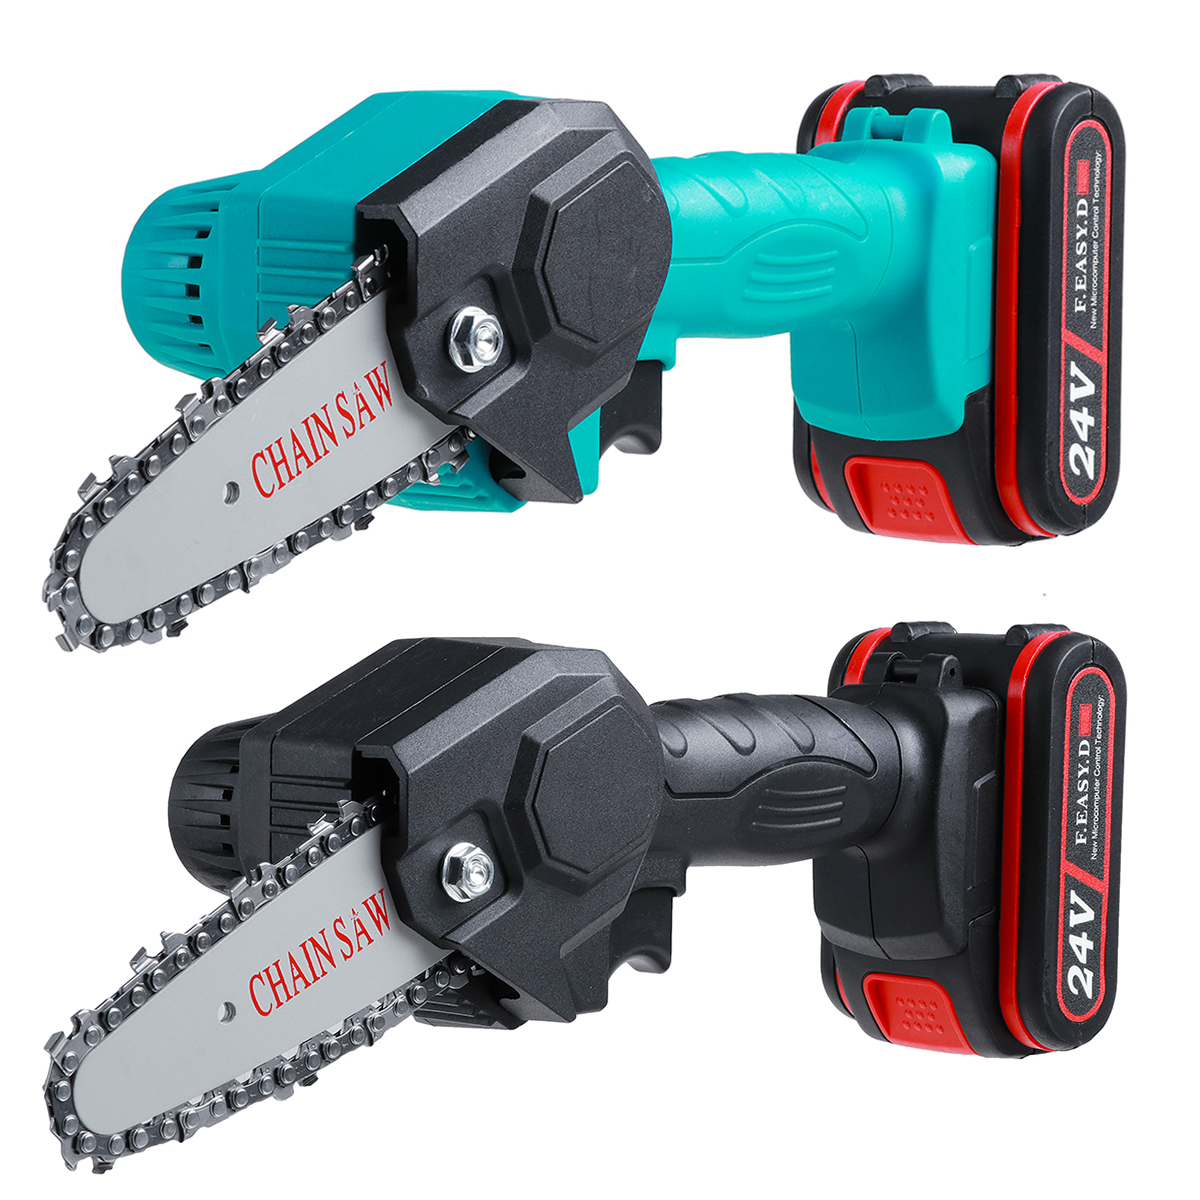 4-24V-Rechargeable-Cordless-Electric-Saw-Mini-Handheld-Chainsaw-Wood-Cutter-Tool-1801610-5